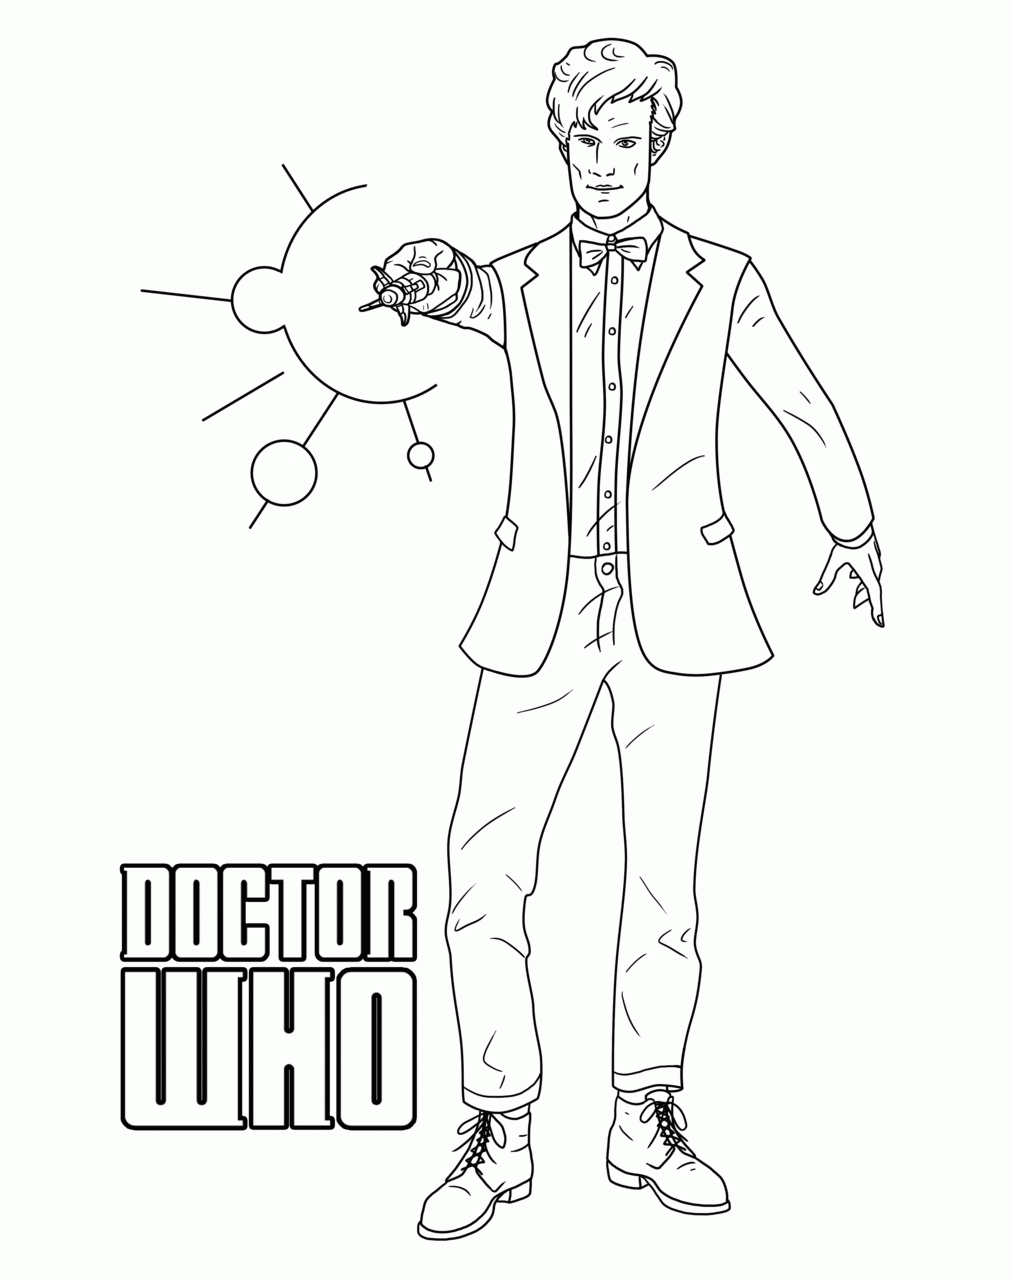 doctor-who-coloring-page-0018-q1